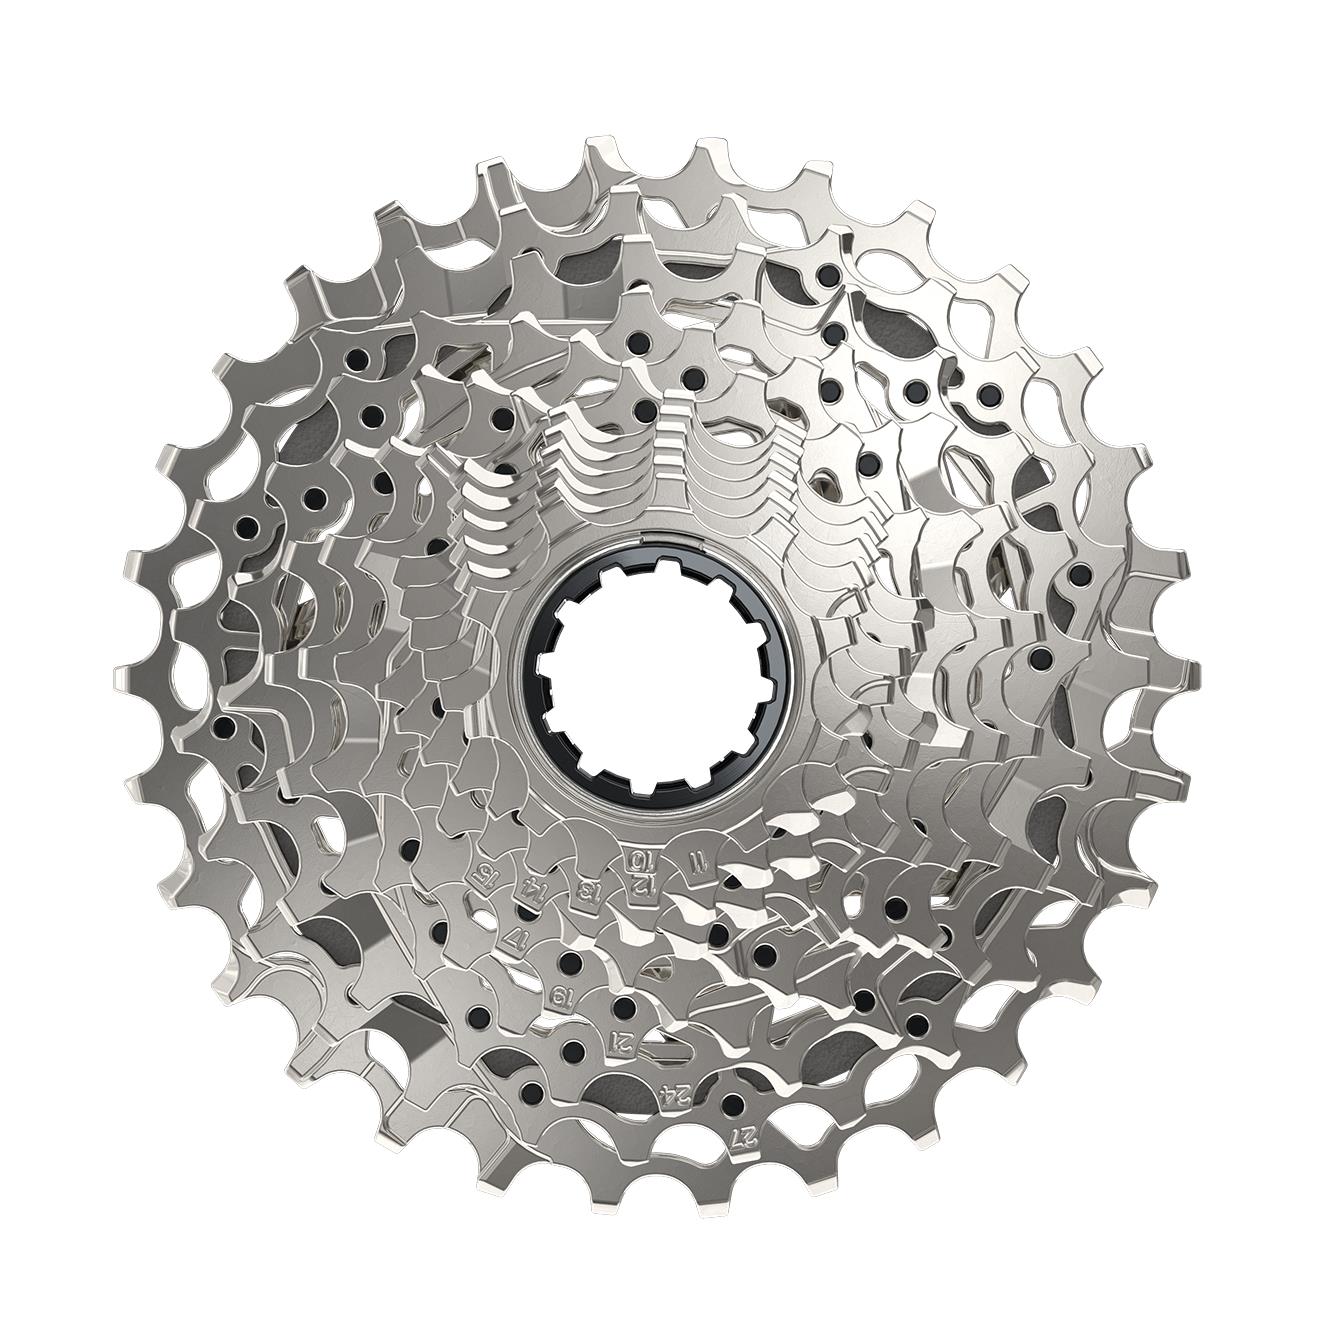 Sram Rival Axs Cassette Xg-1250 D1 12 Speed (For Use With Rival Axs Rd And/Or Red & Force Axs 36T Max Rds)